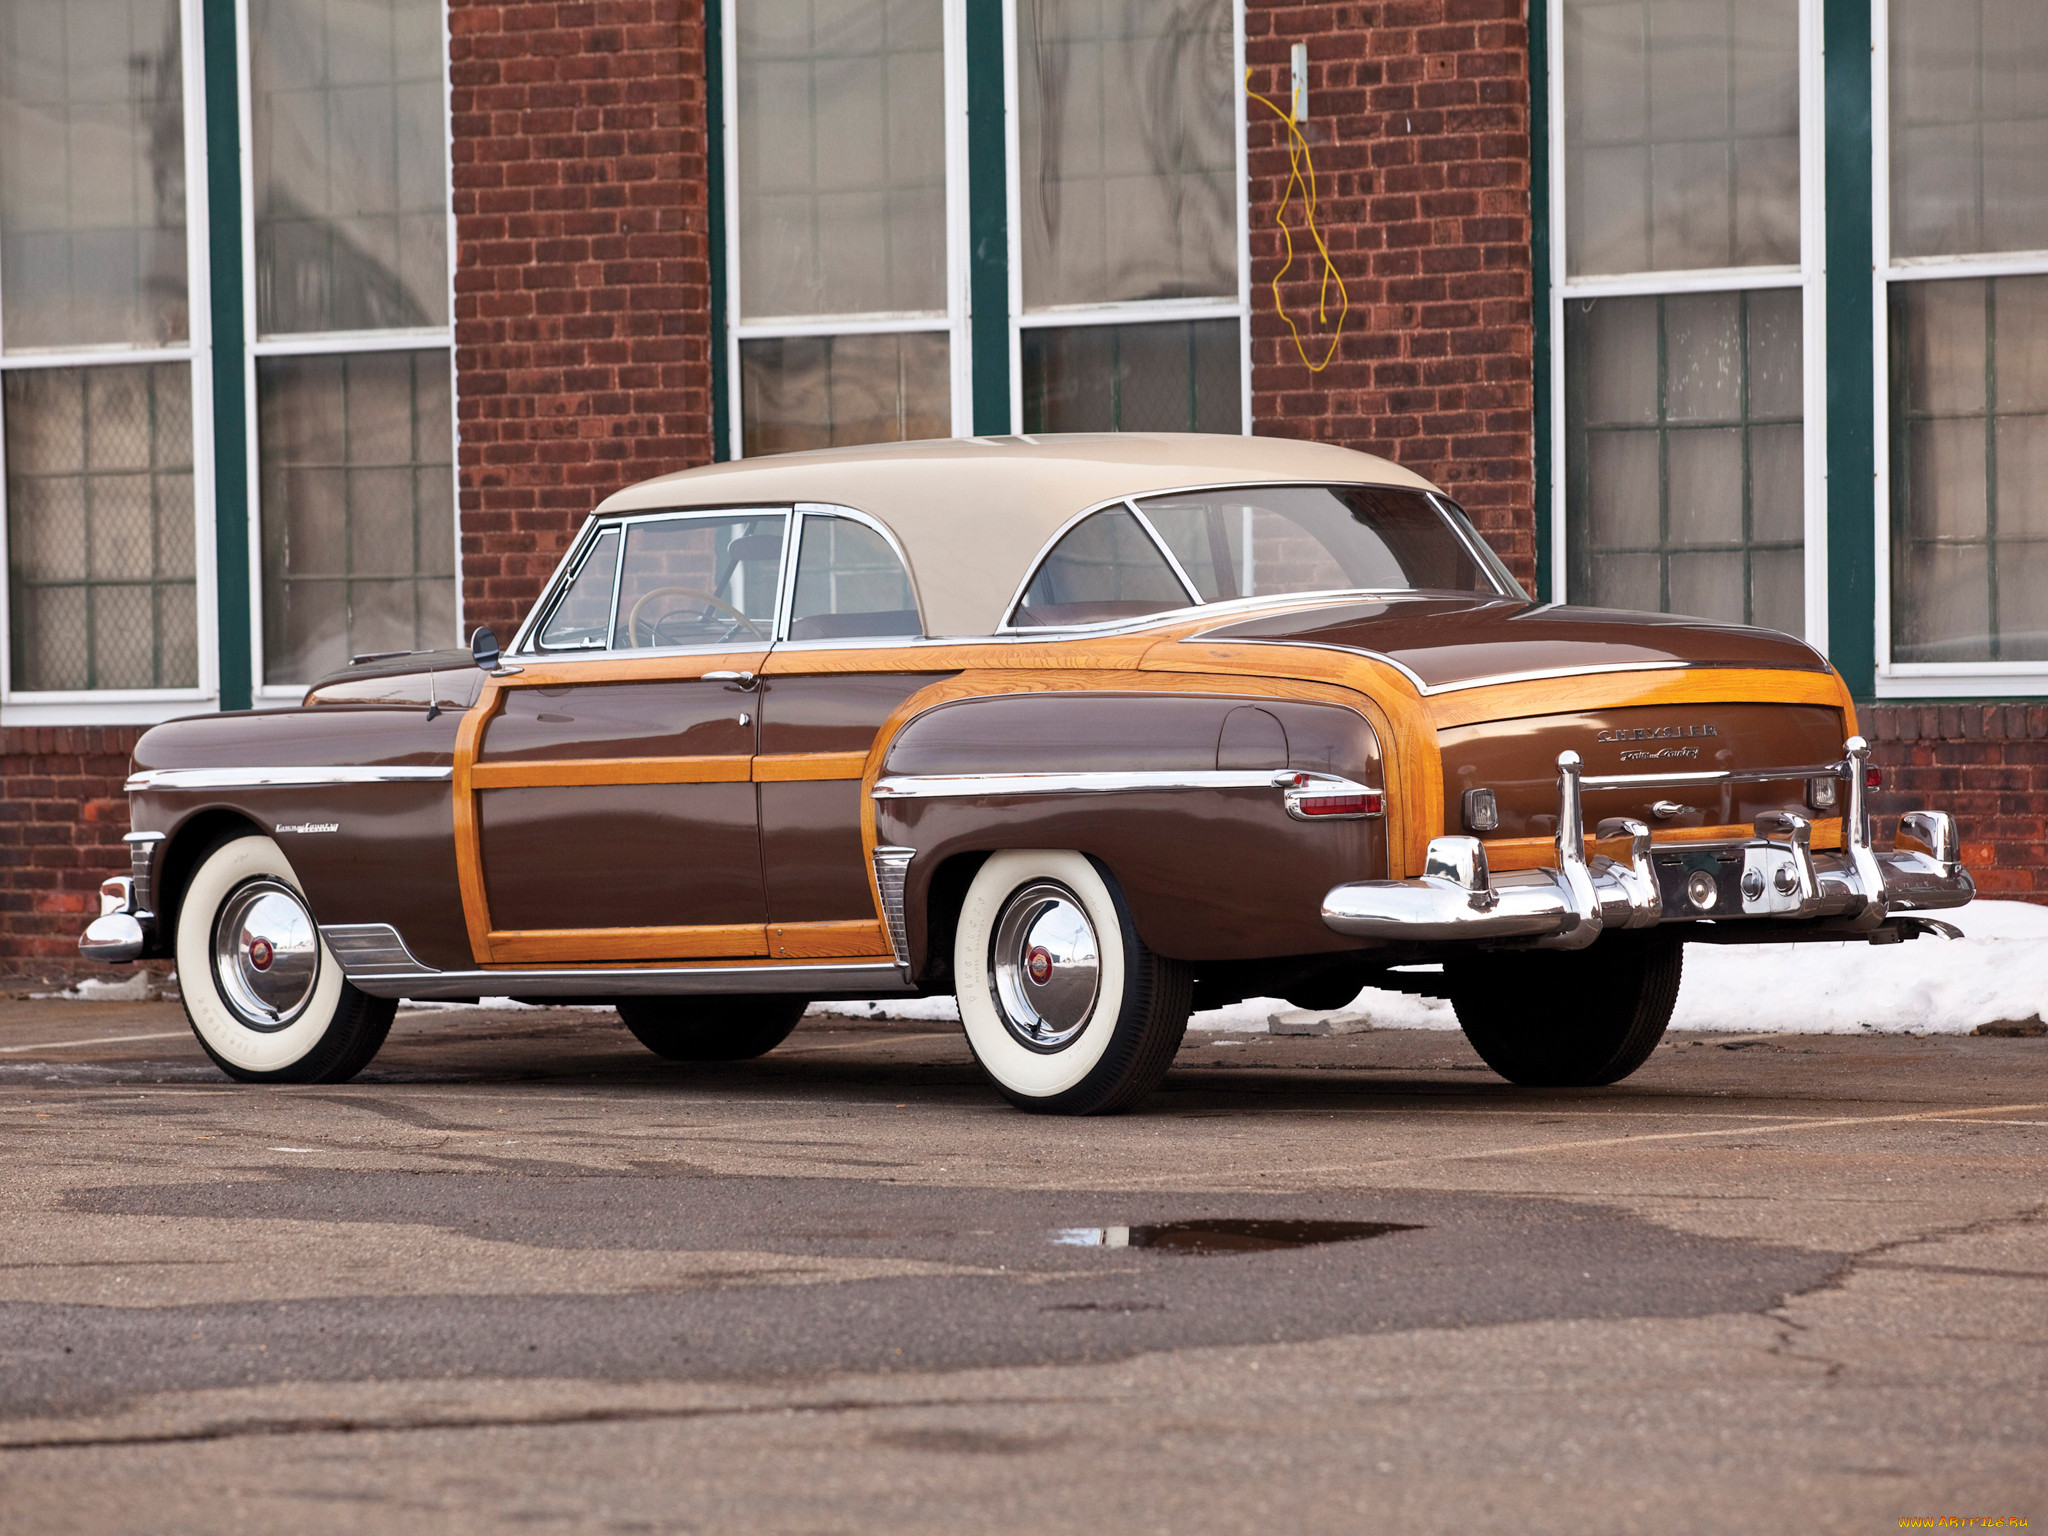 chrysler town & country newport coupe 1950, , chrysler, coupe, newport, country, town, 1950